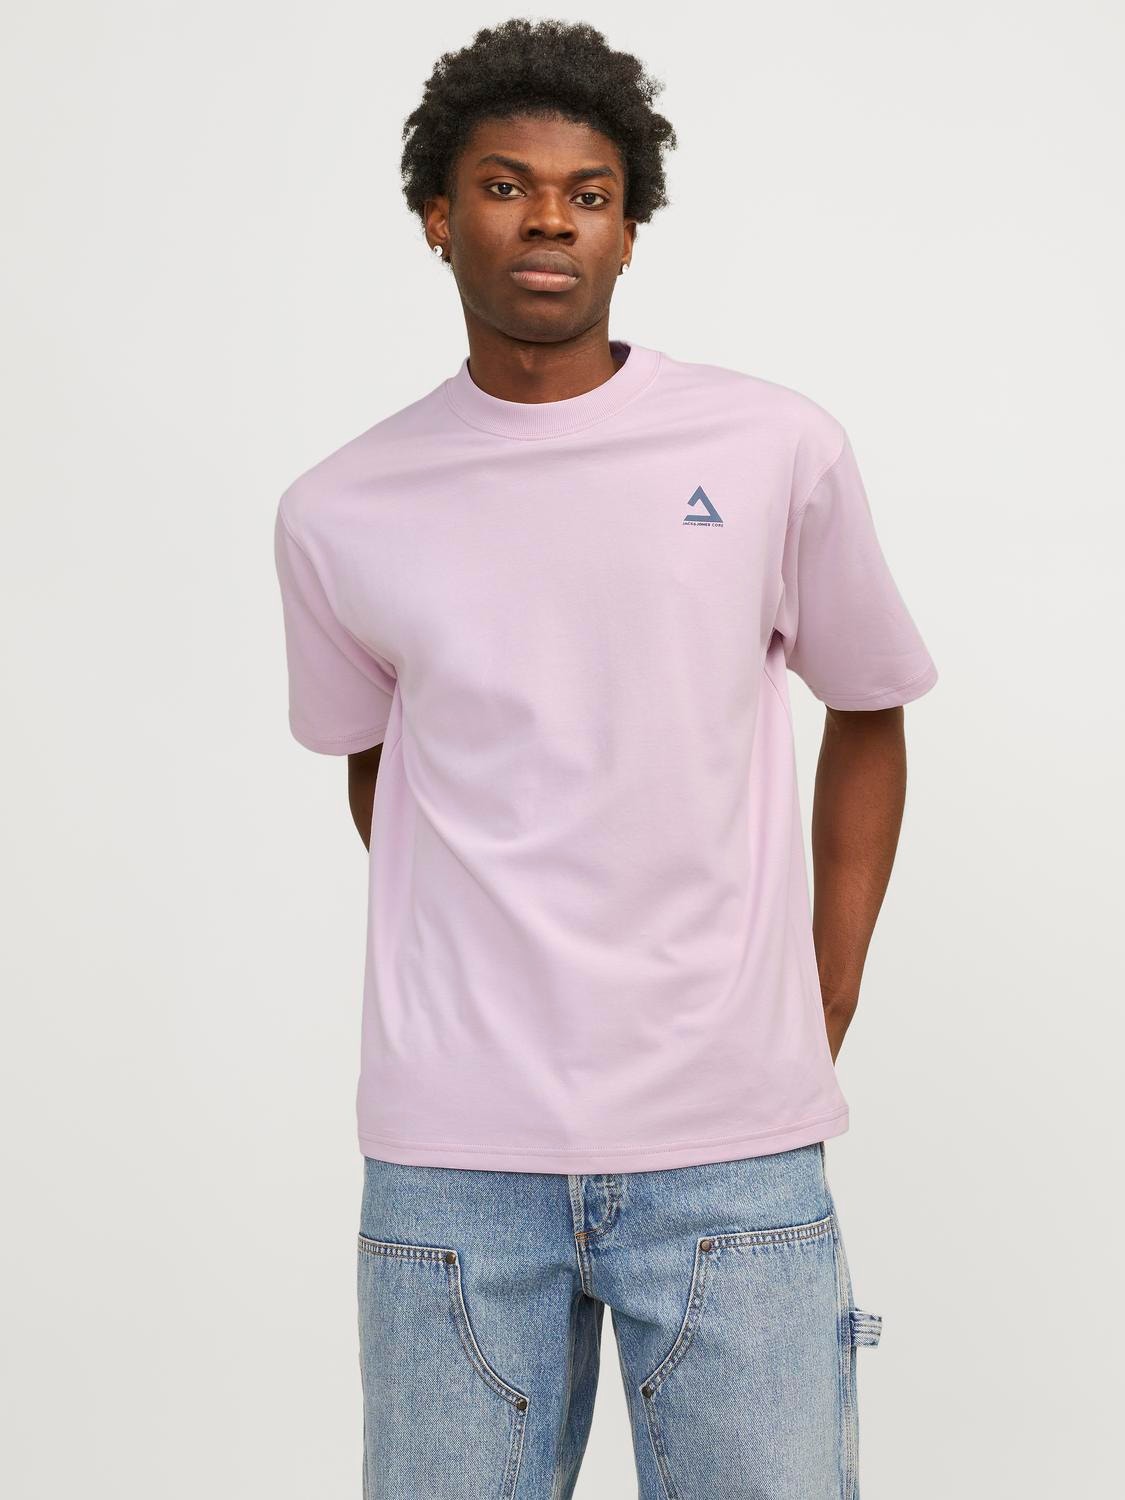 Jack & Jones Printed Crew neck T-shirt -Winsome Orchid - 12258622